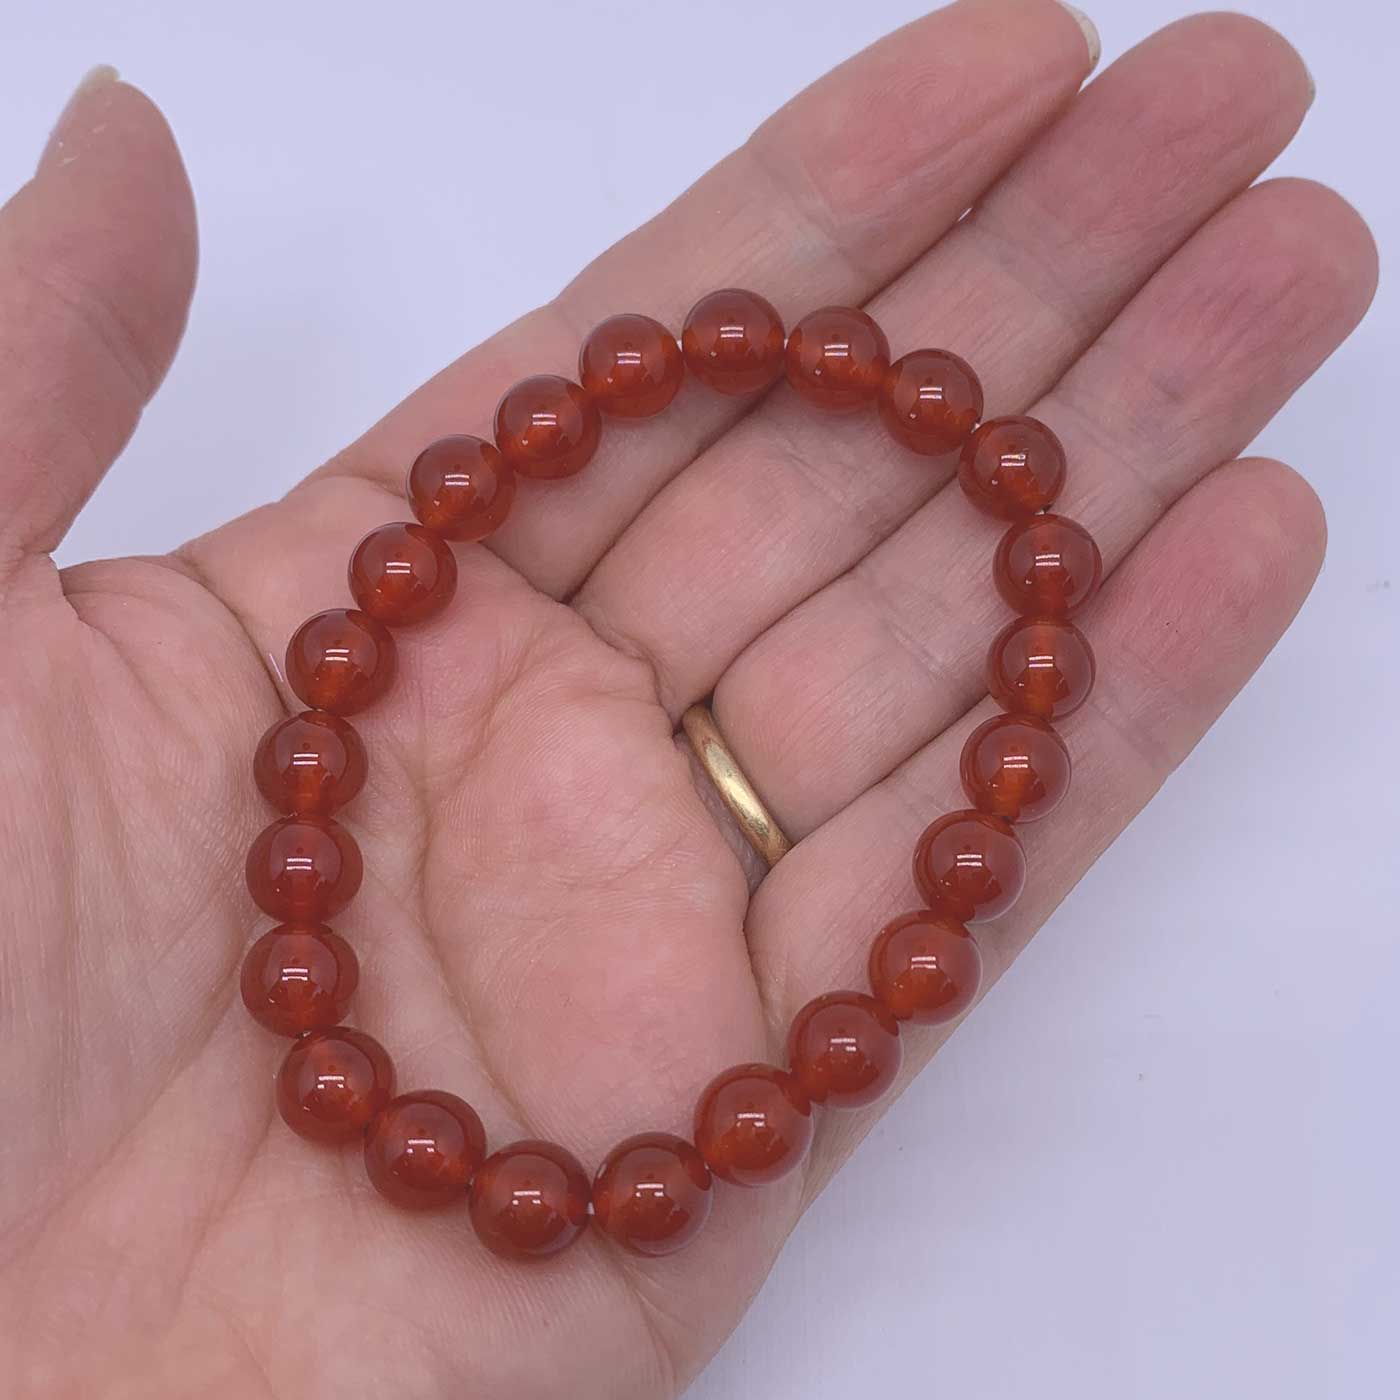 red agate stretch bracelet for women